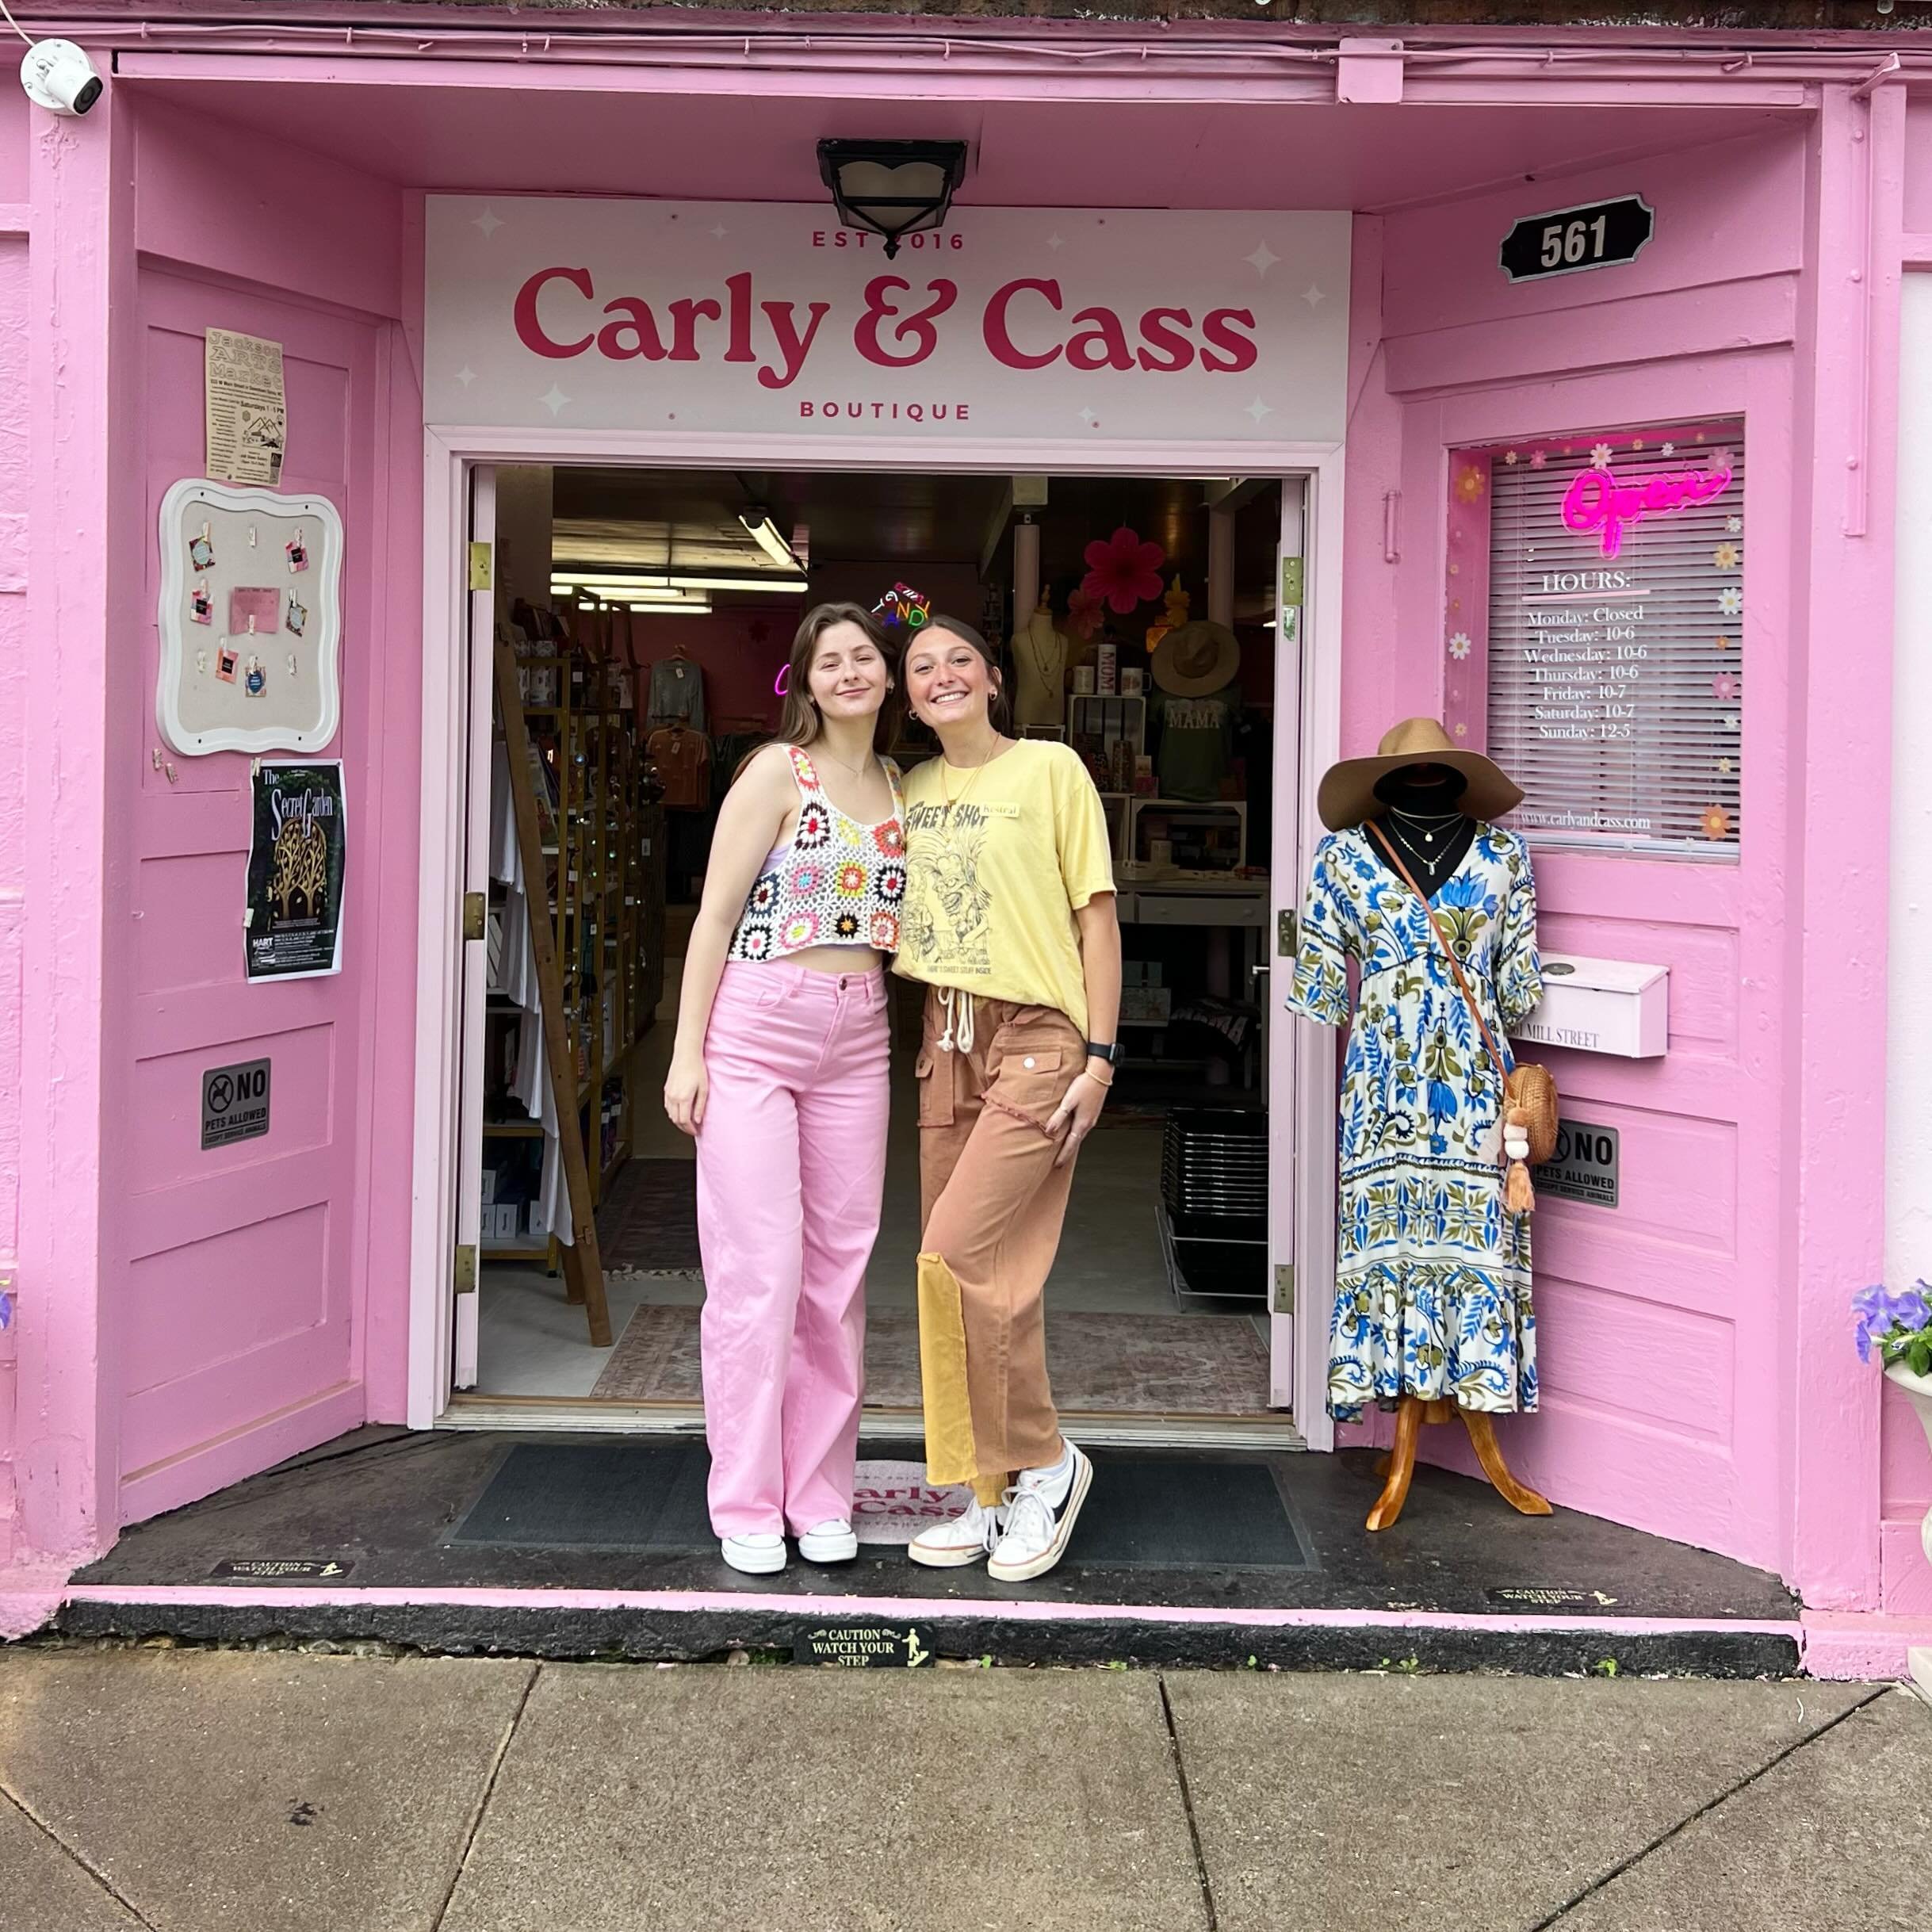 Come say hello to Kes, Rachel (&amp; Rob &amp; Carly too!) today from 10-7 PM at 561 Mill Street in downtown Sylva! 🛍💕